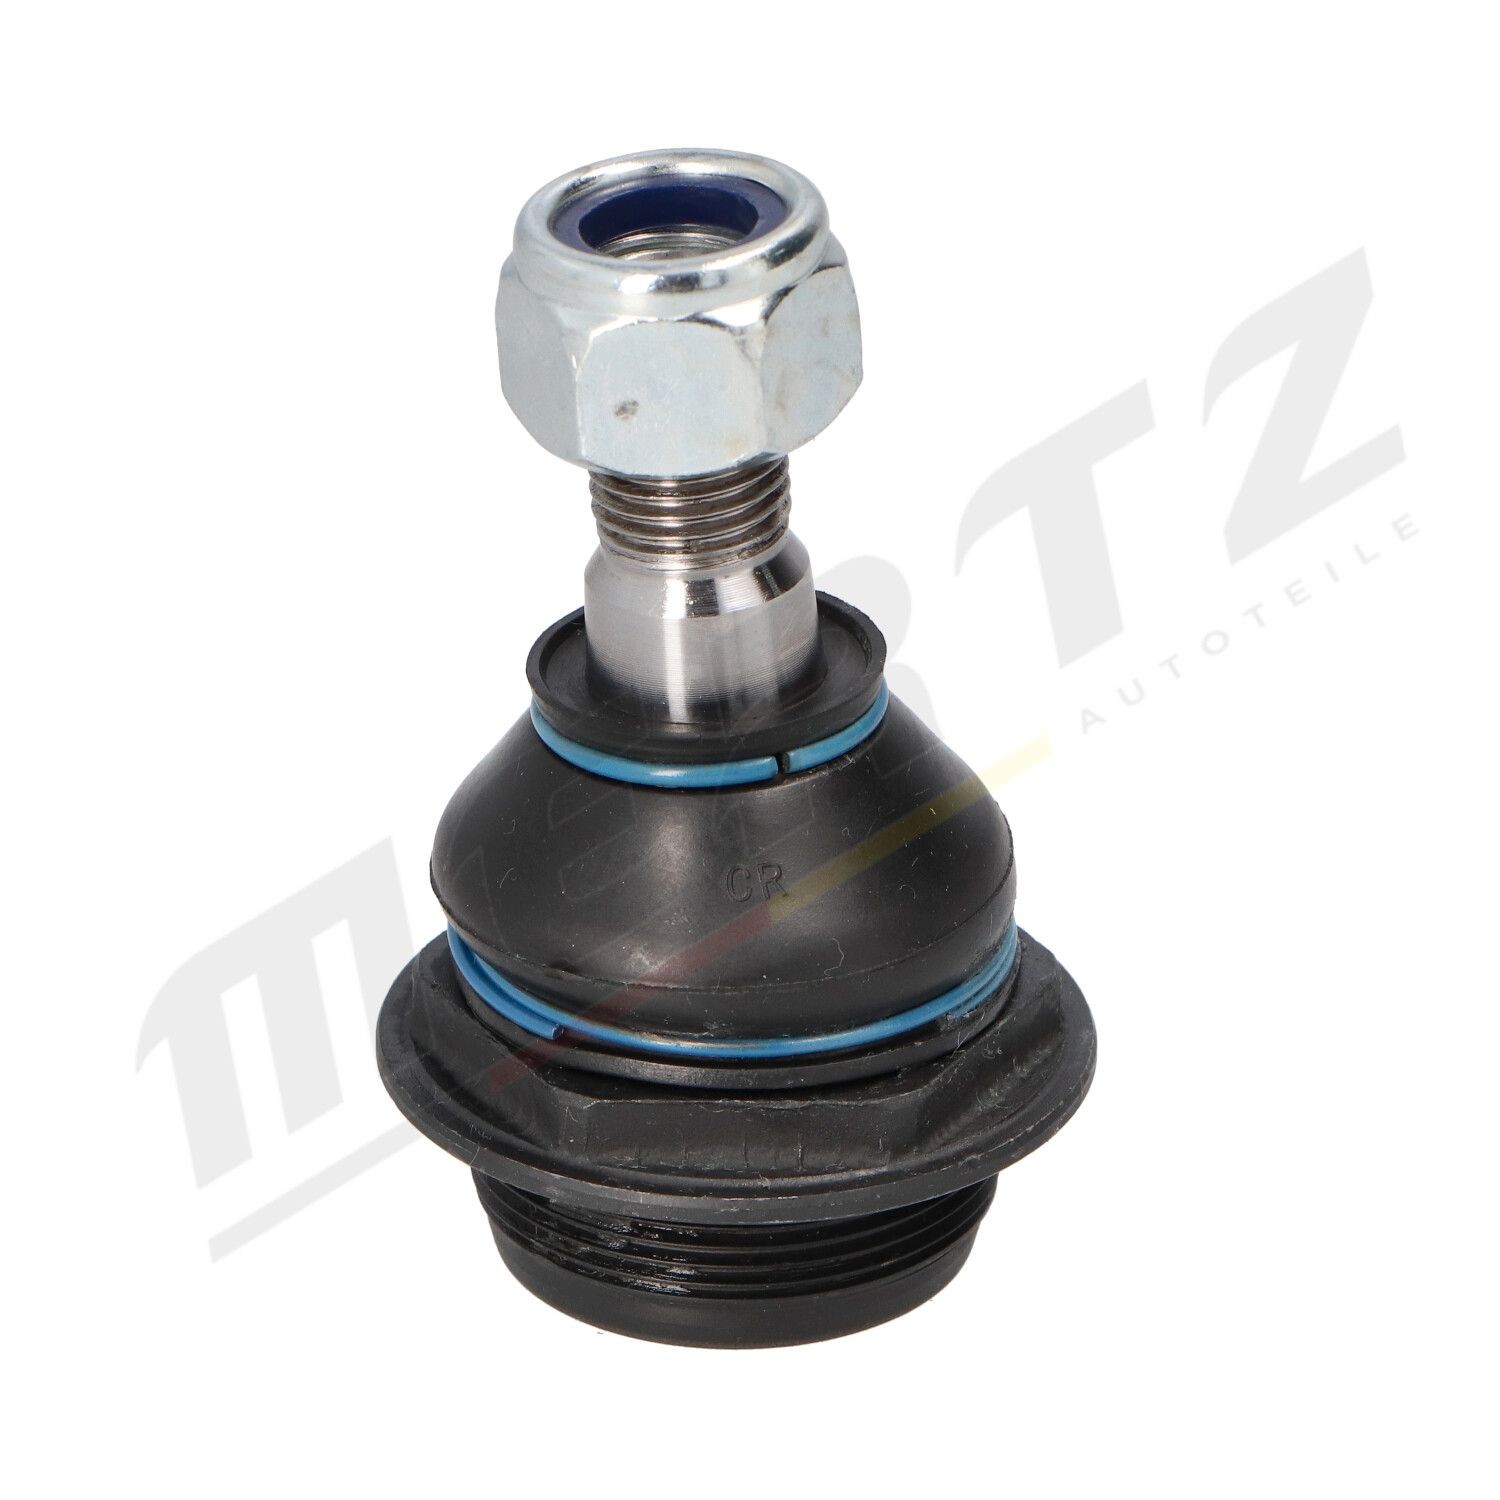 Original M-S0399 MERTZ Ball joint experience and price